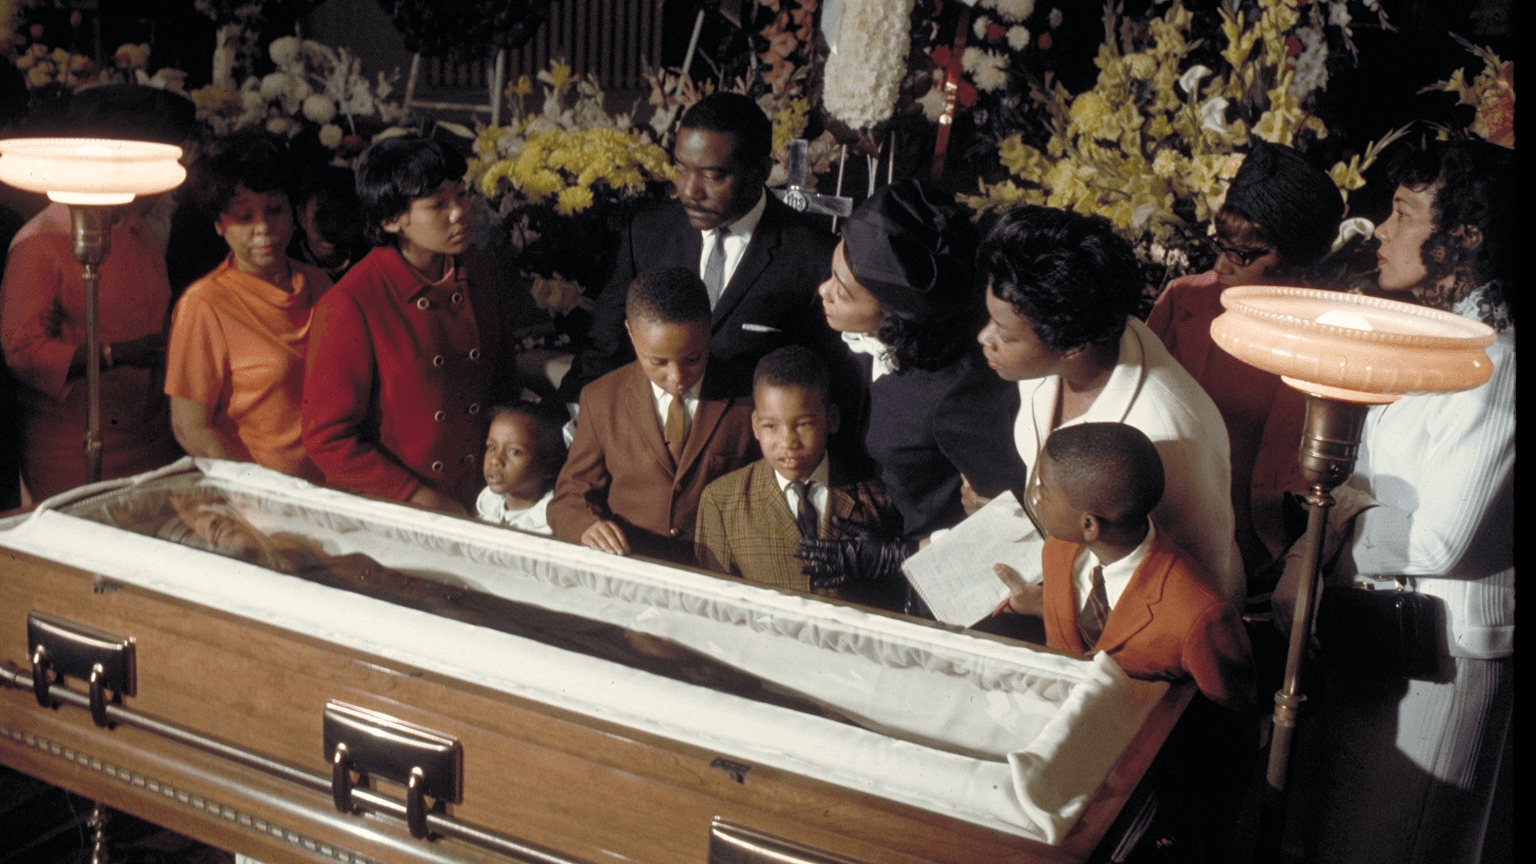 Two months previously at Ebenezer Baptist Church, on Feb. 4, 1968, King gave his famous “Drum Major” sermon. At his widow's request, King eulogized himself, with a recording of the “Drum Major” sermon played at the funeral. 